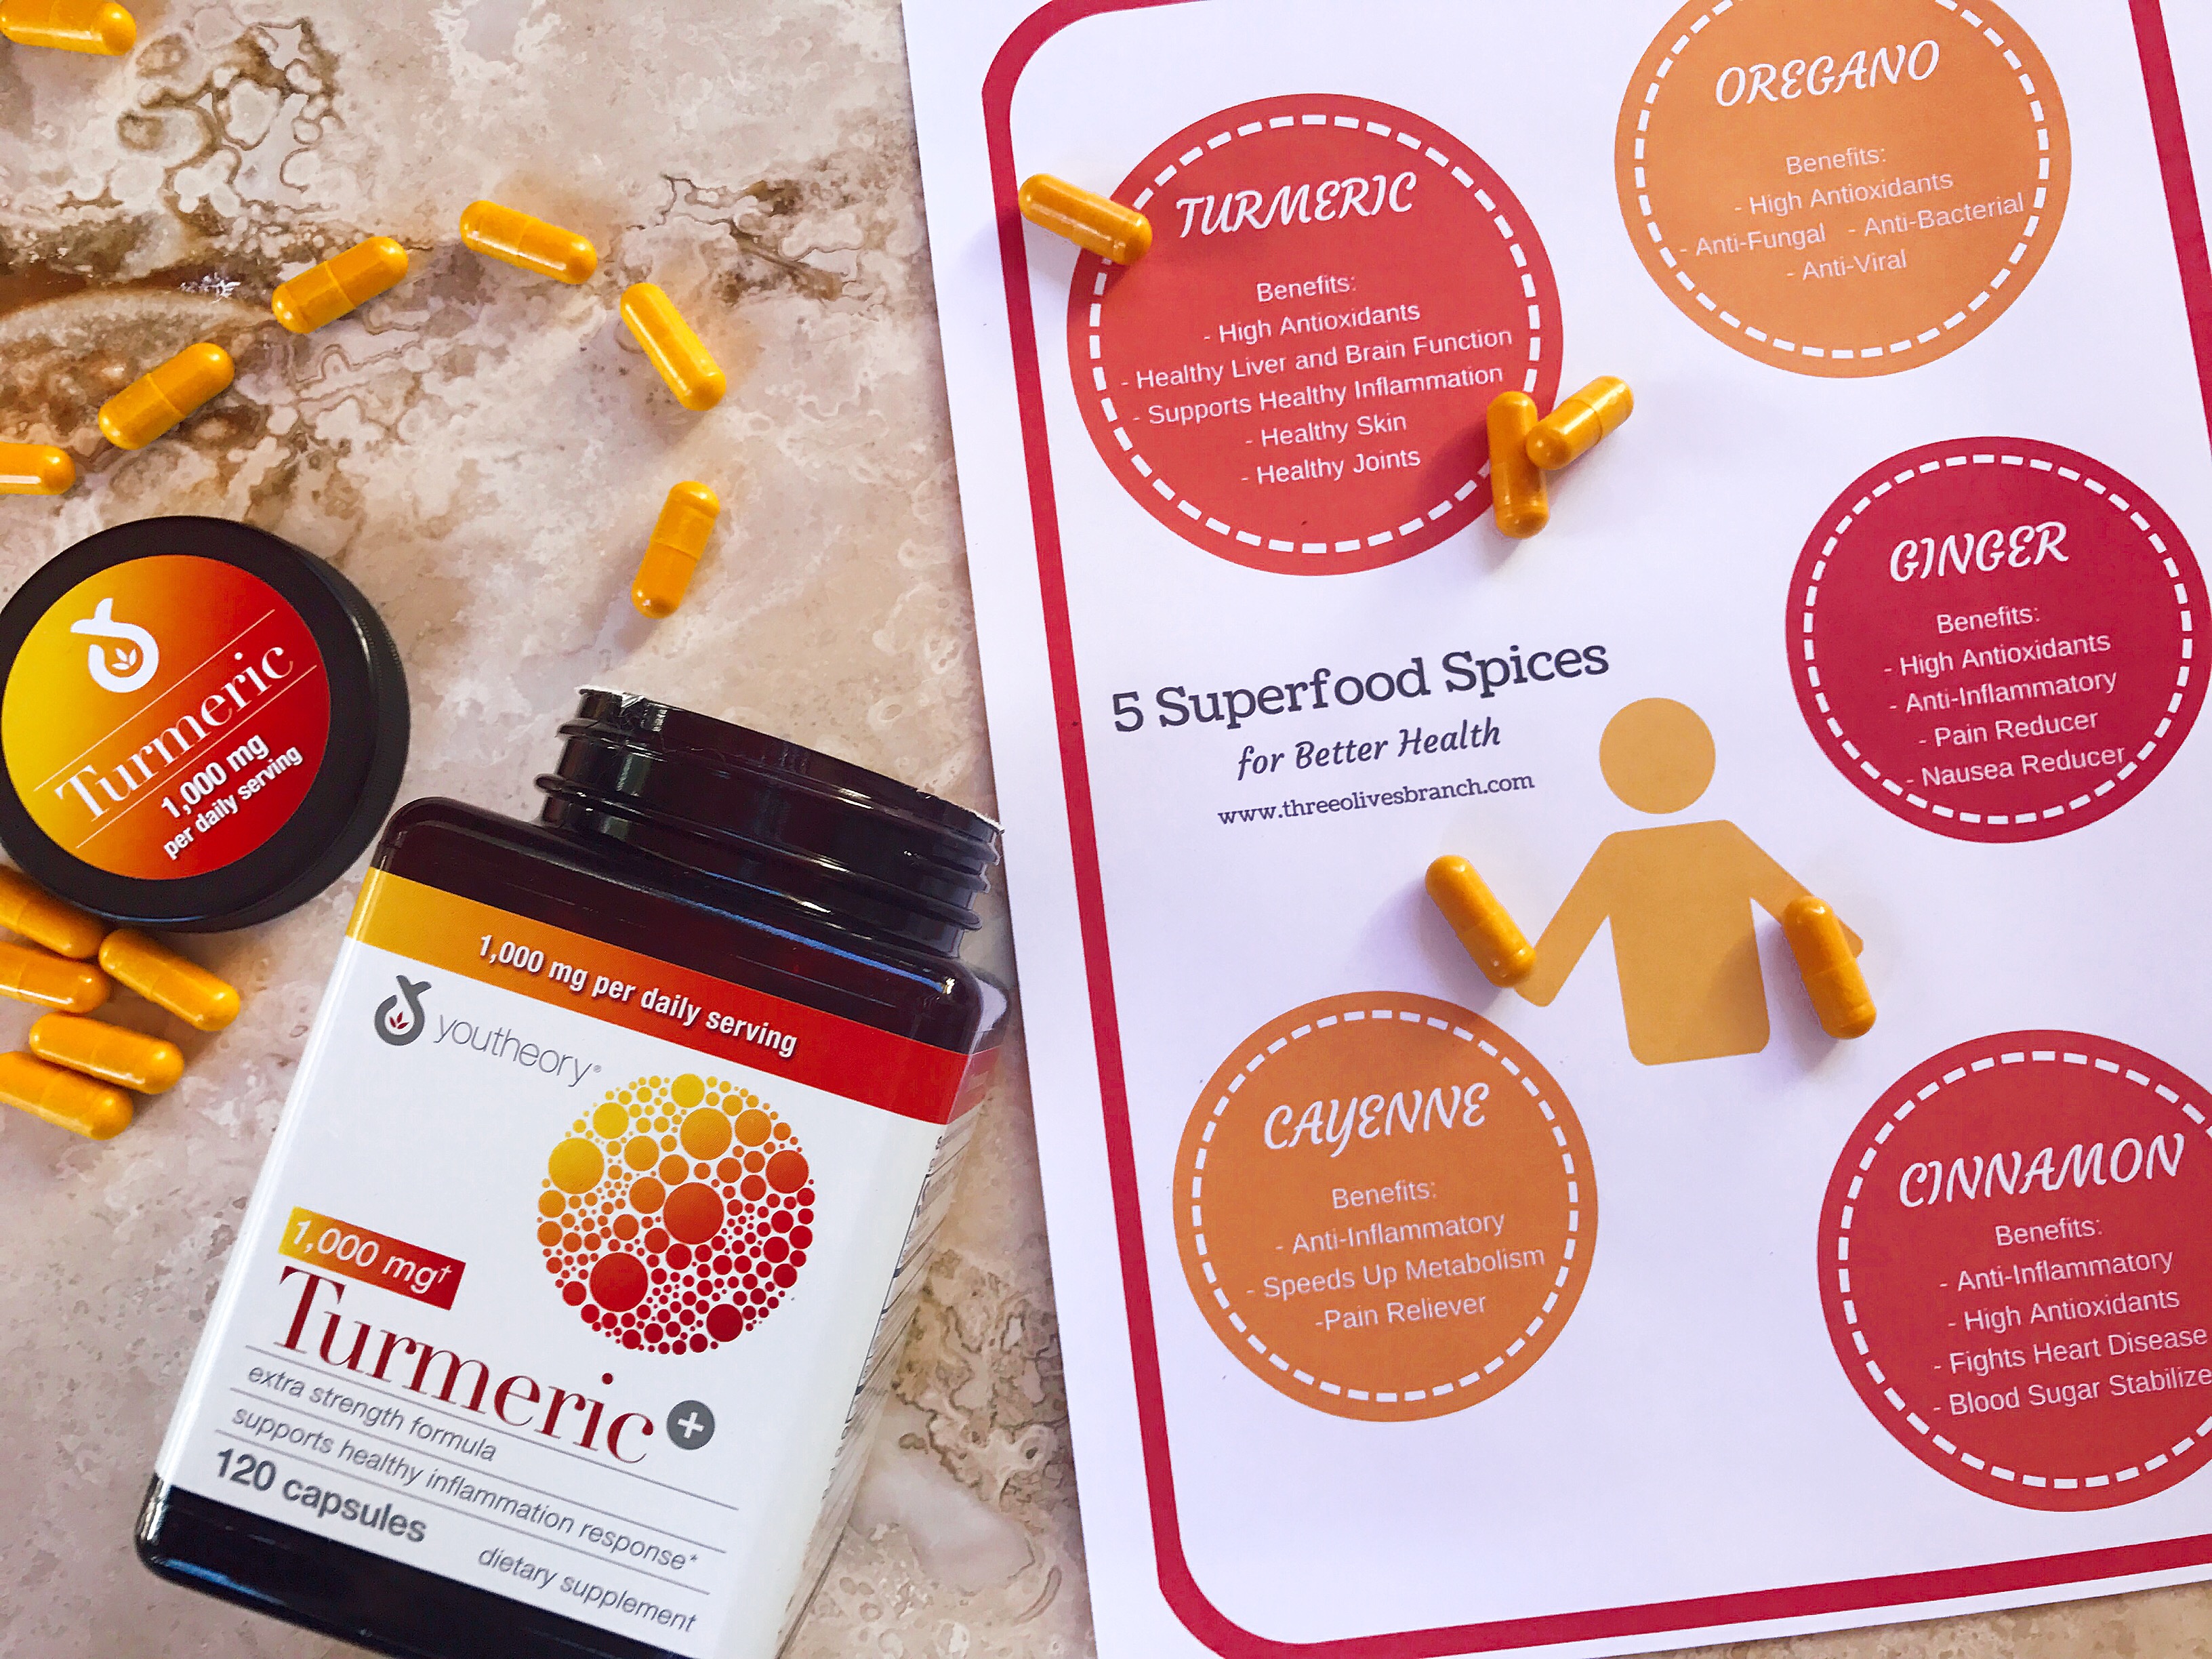 Support a healthy lifestyle with these Five Superfood Spices for Better Health! FREE printable to remind you of these powerhouse spices.